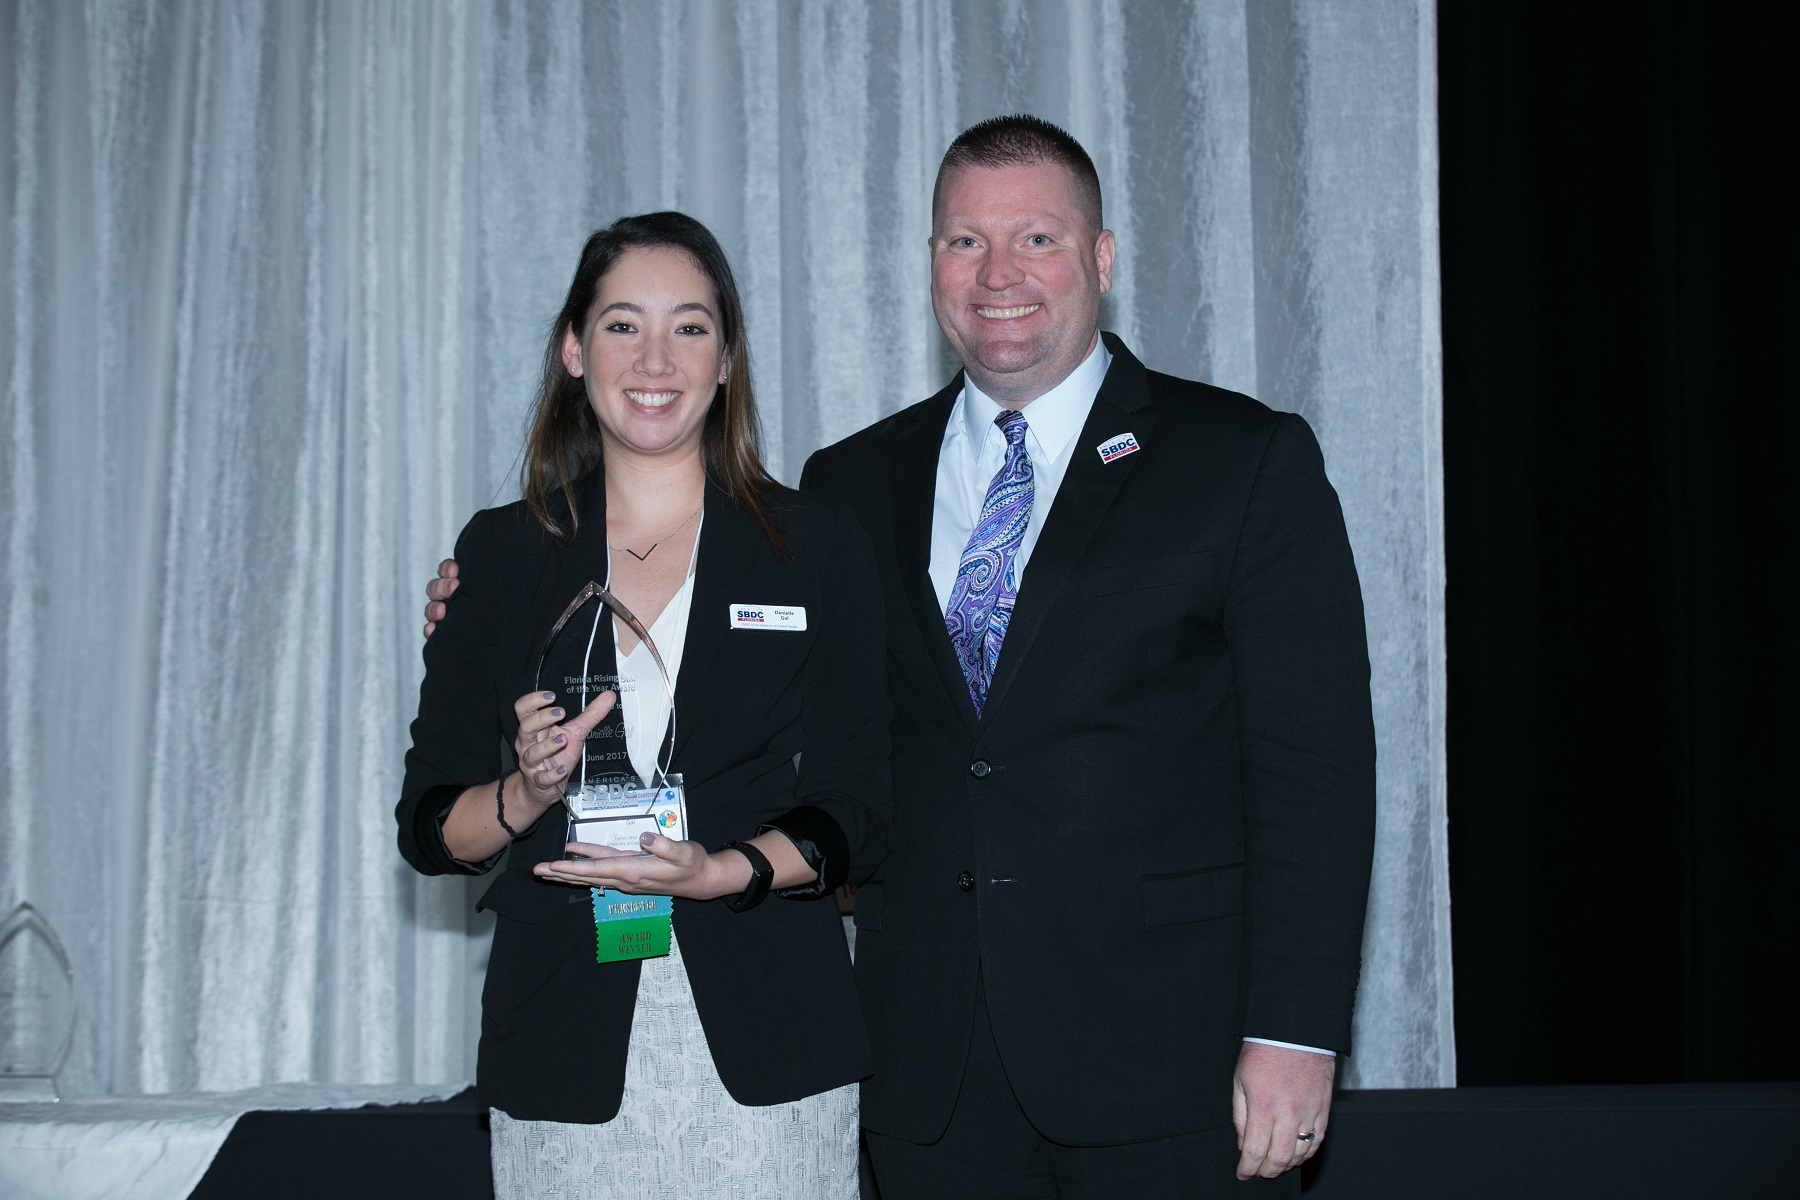 L-R: Danielle Gal, the 2017 Florida Rising Star, and Michael Myhre